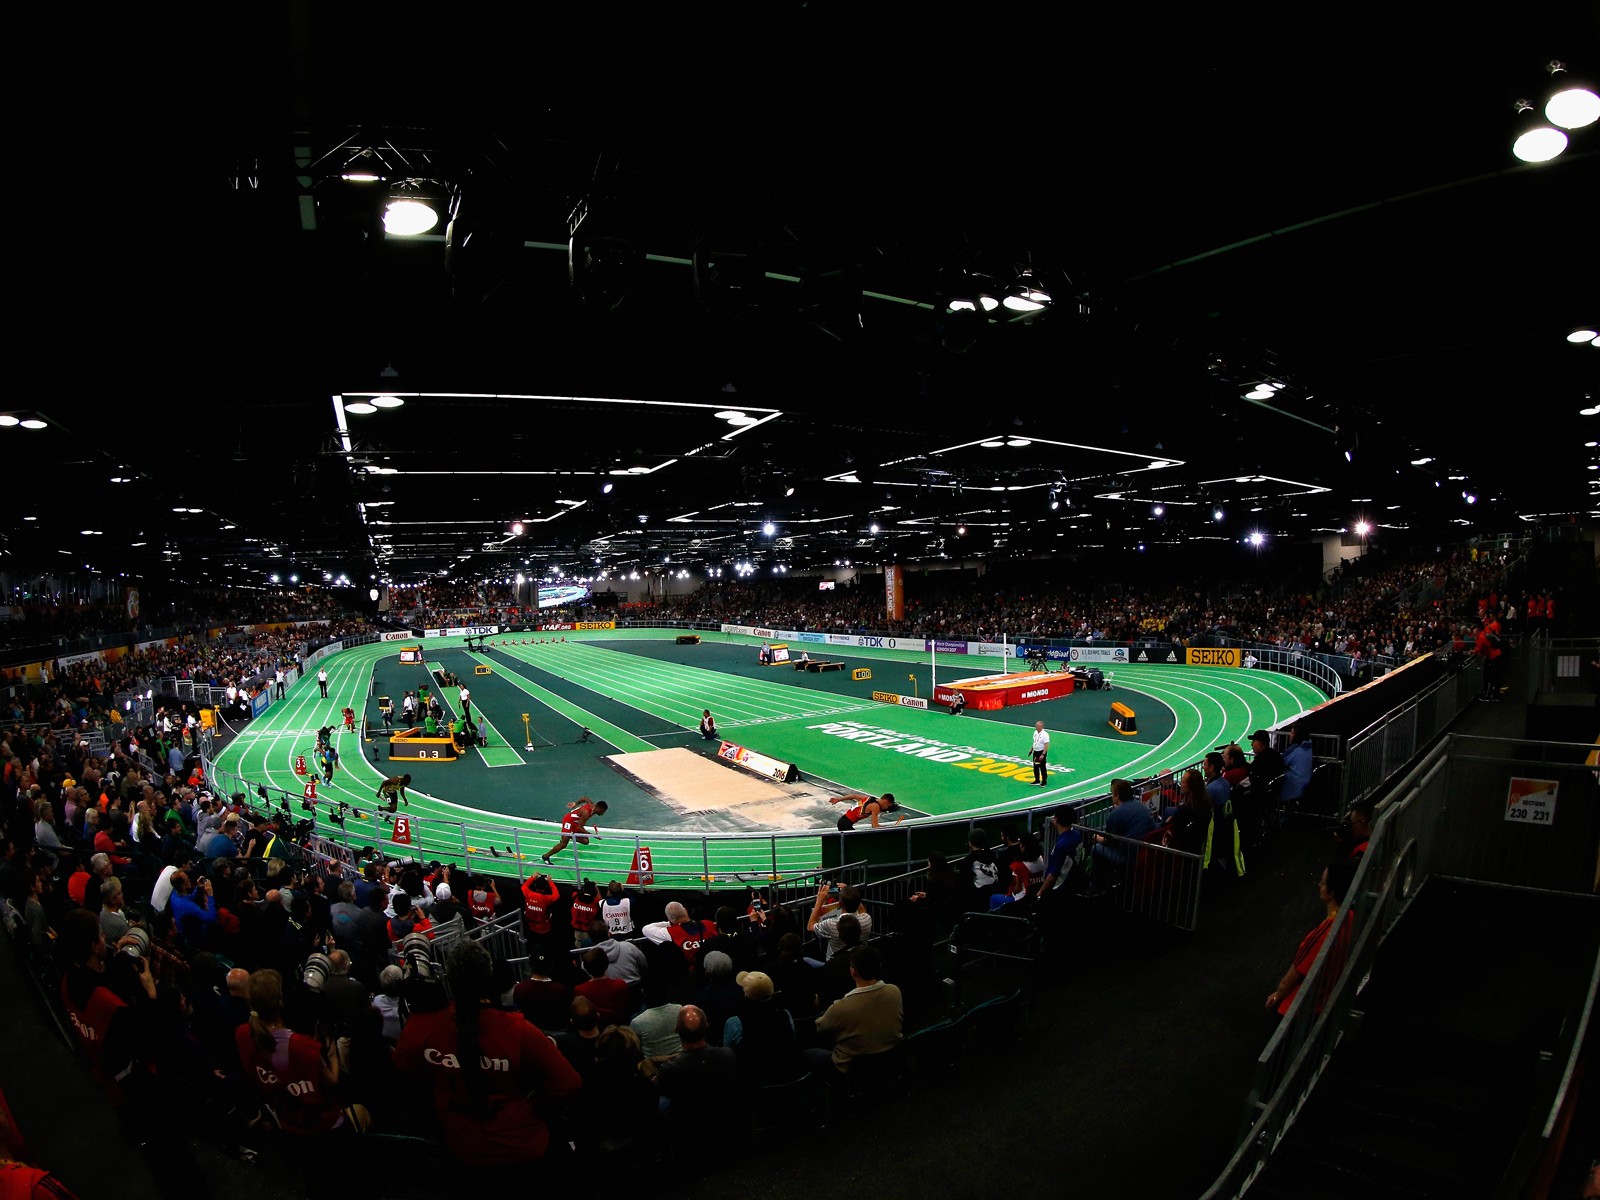 A general view of the start in the Men's 4x400 Metres Relay Final during day four of the IAAF World Indoor Championships at Oregon Convention Center on March 20, 2016 in Portland, Oregon. (Photo by Christian Petersen/Getty Images for IAAF)